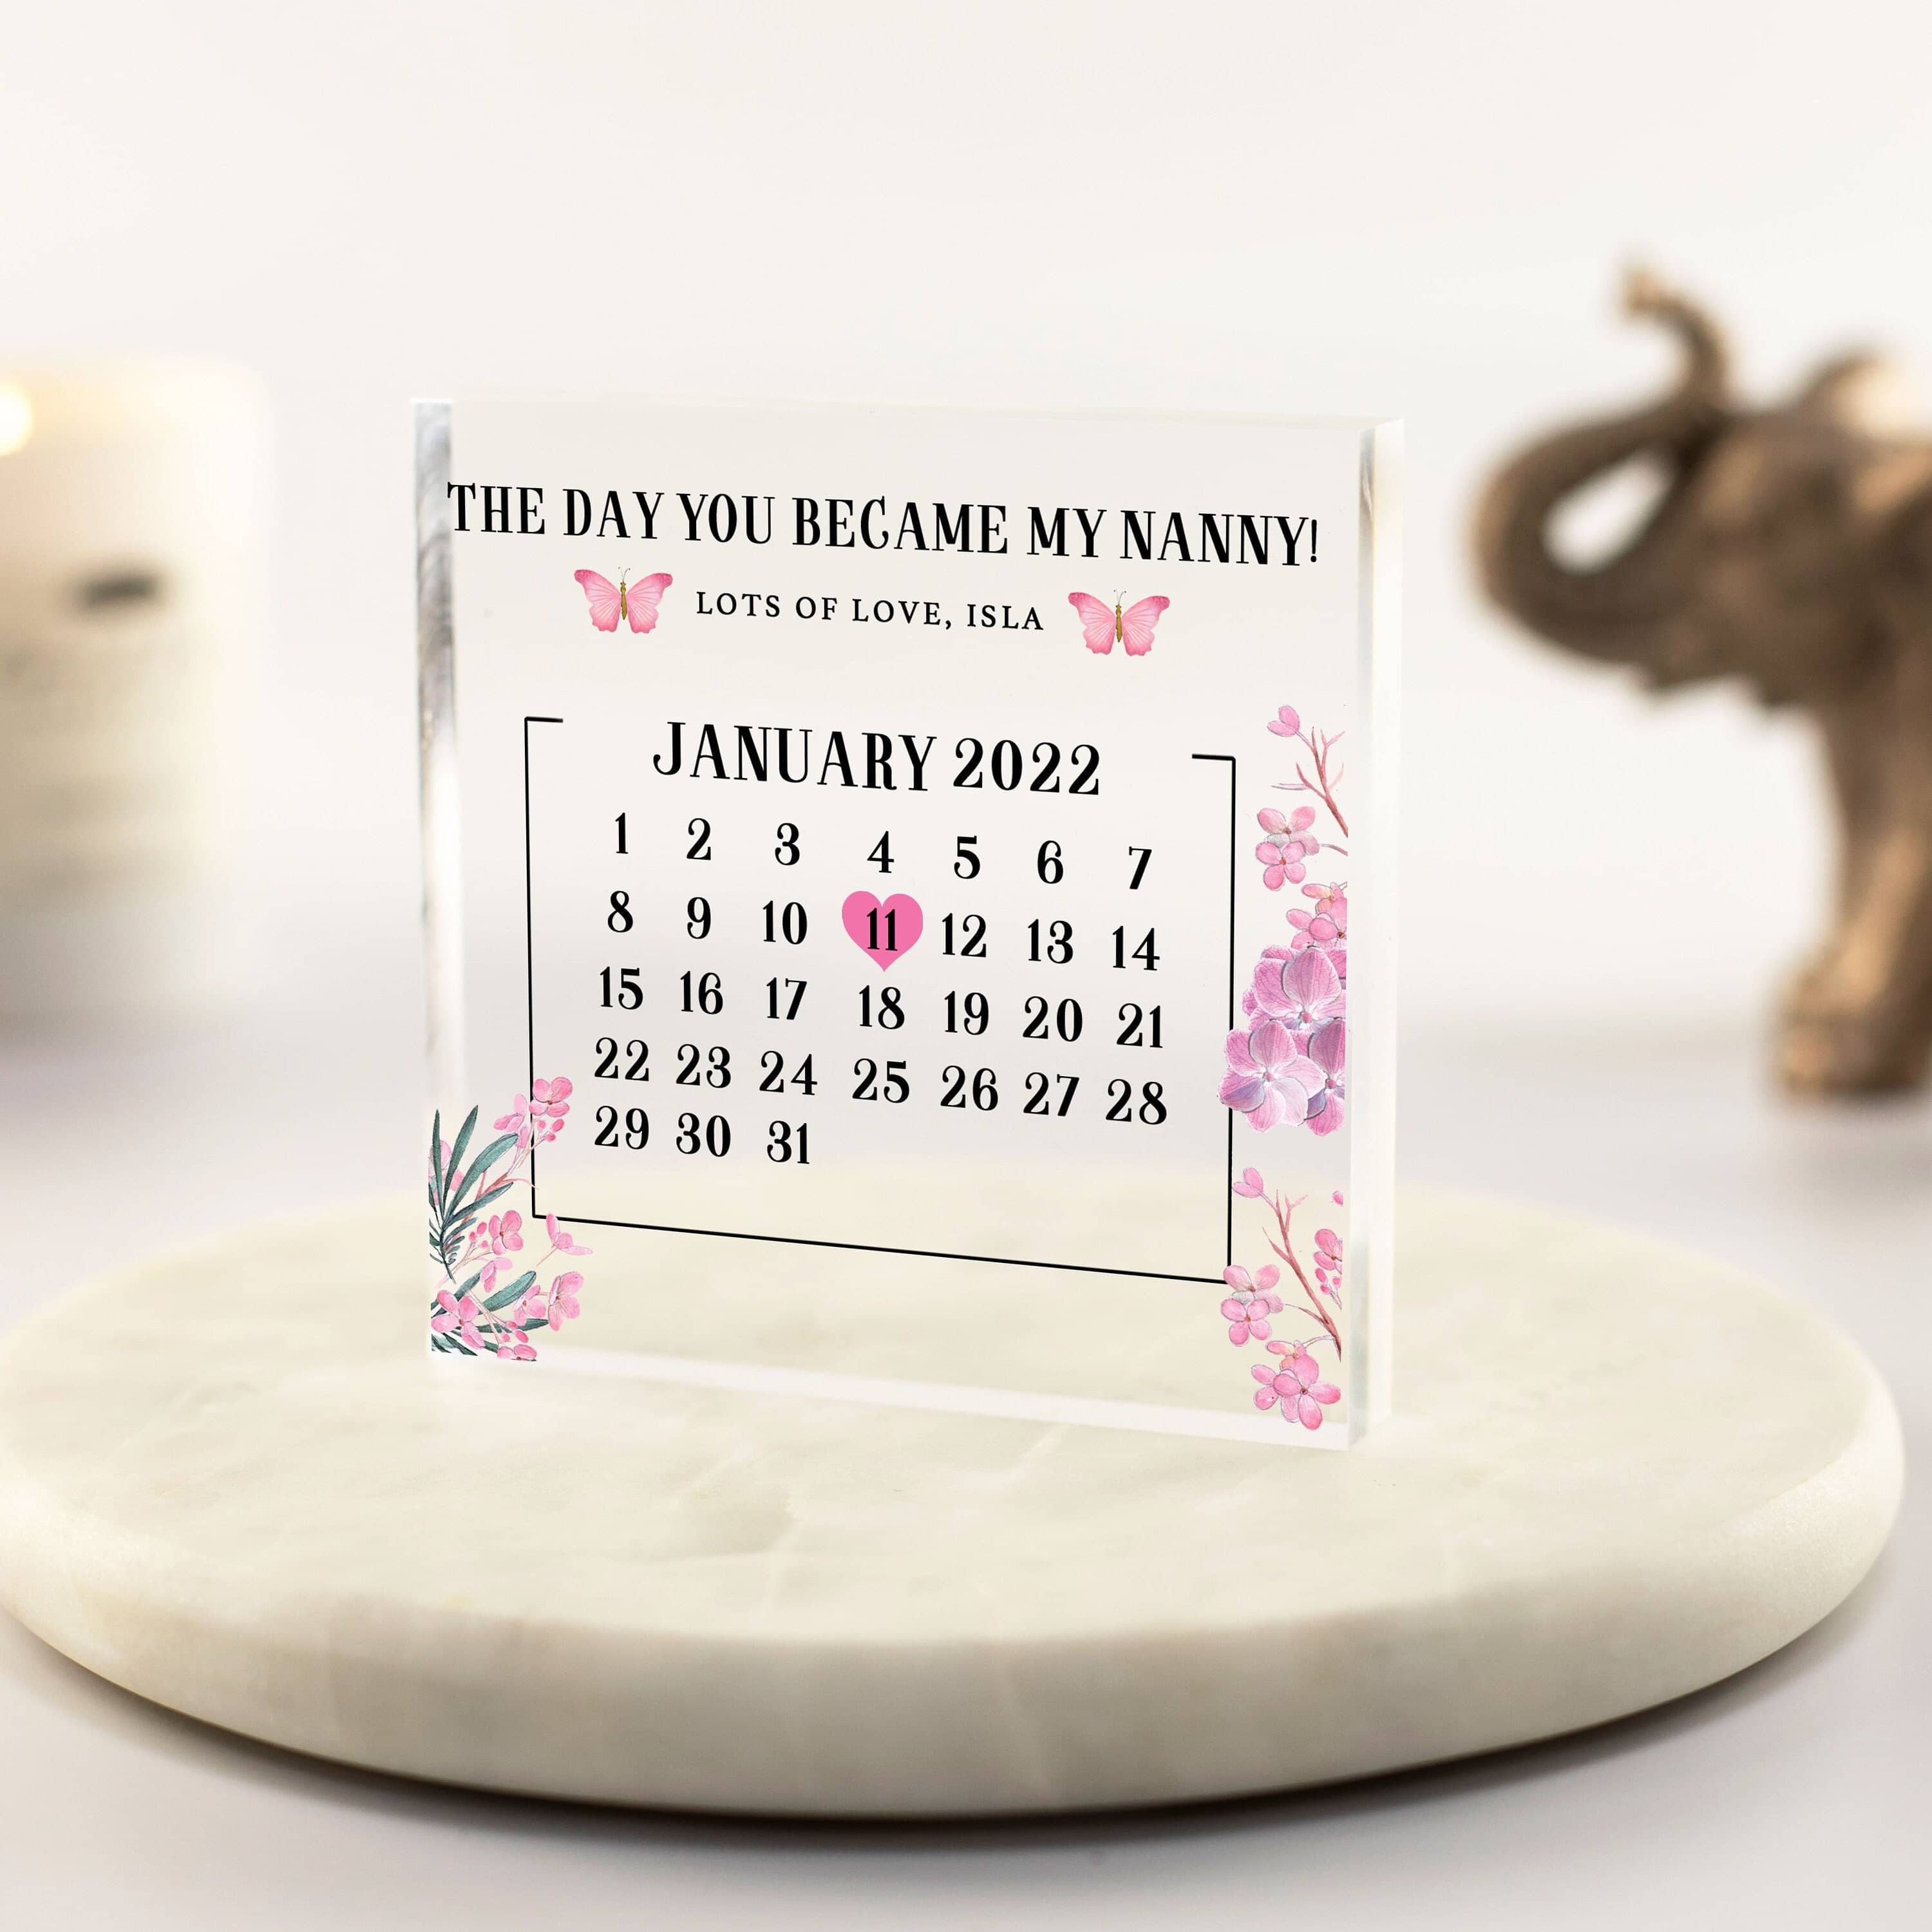 The day you became my nanny gift floral acrylic block - christmas gifts